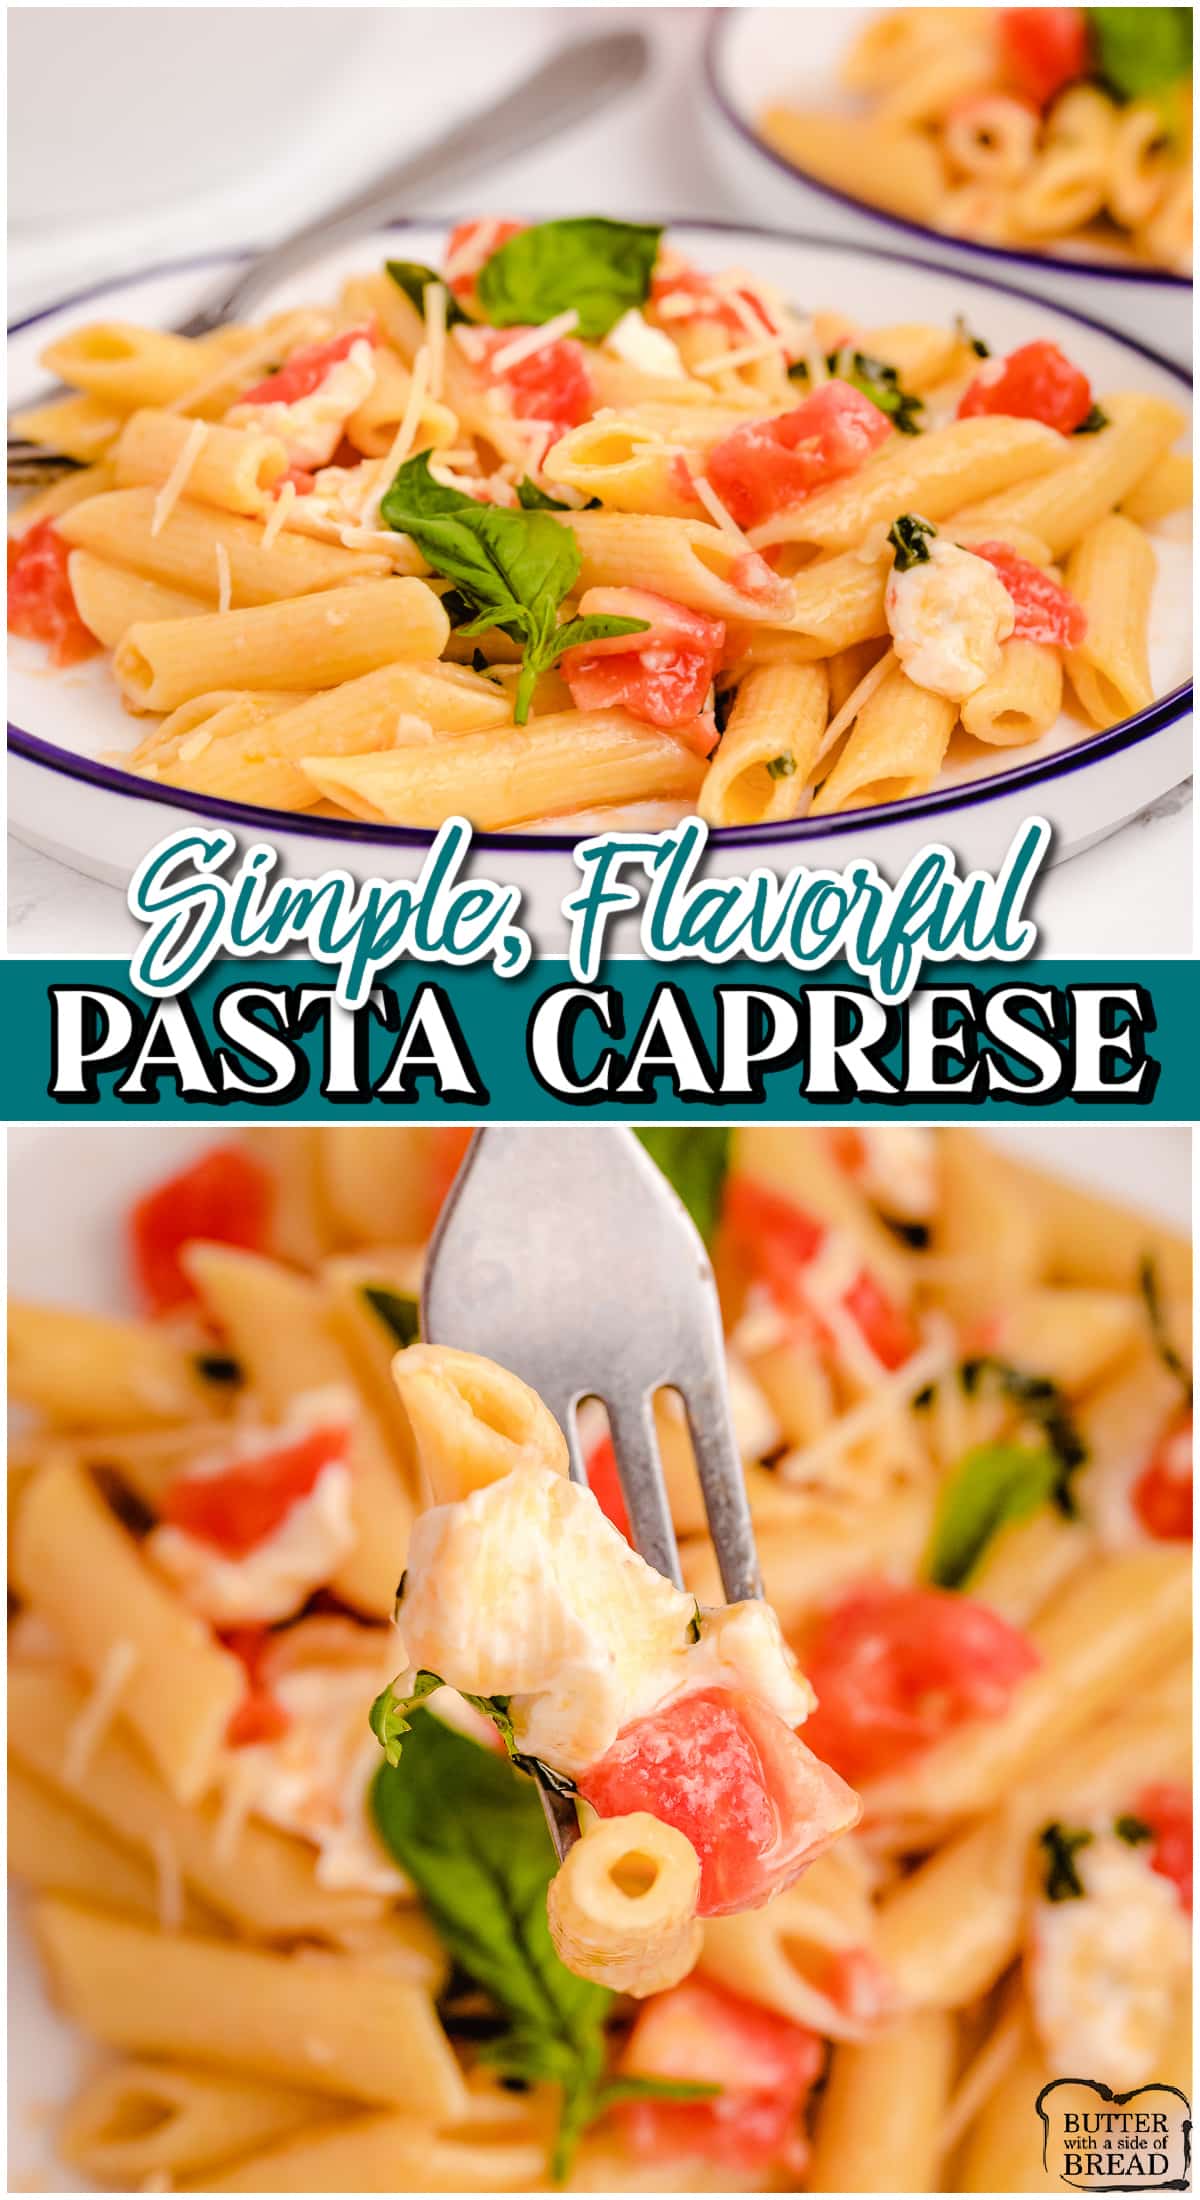 Pasta Caprese is a flavorful, light dinner recipe perfect for weeknights! Quick & easy meatless meal with fantastic fresh flavors from the tomatoes, mozzarella & basil!